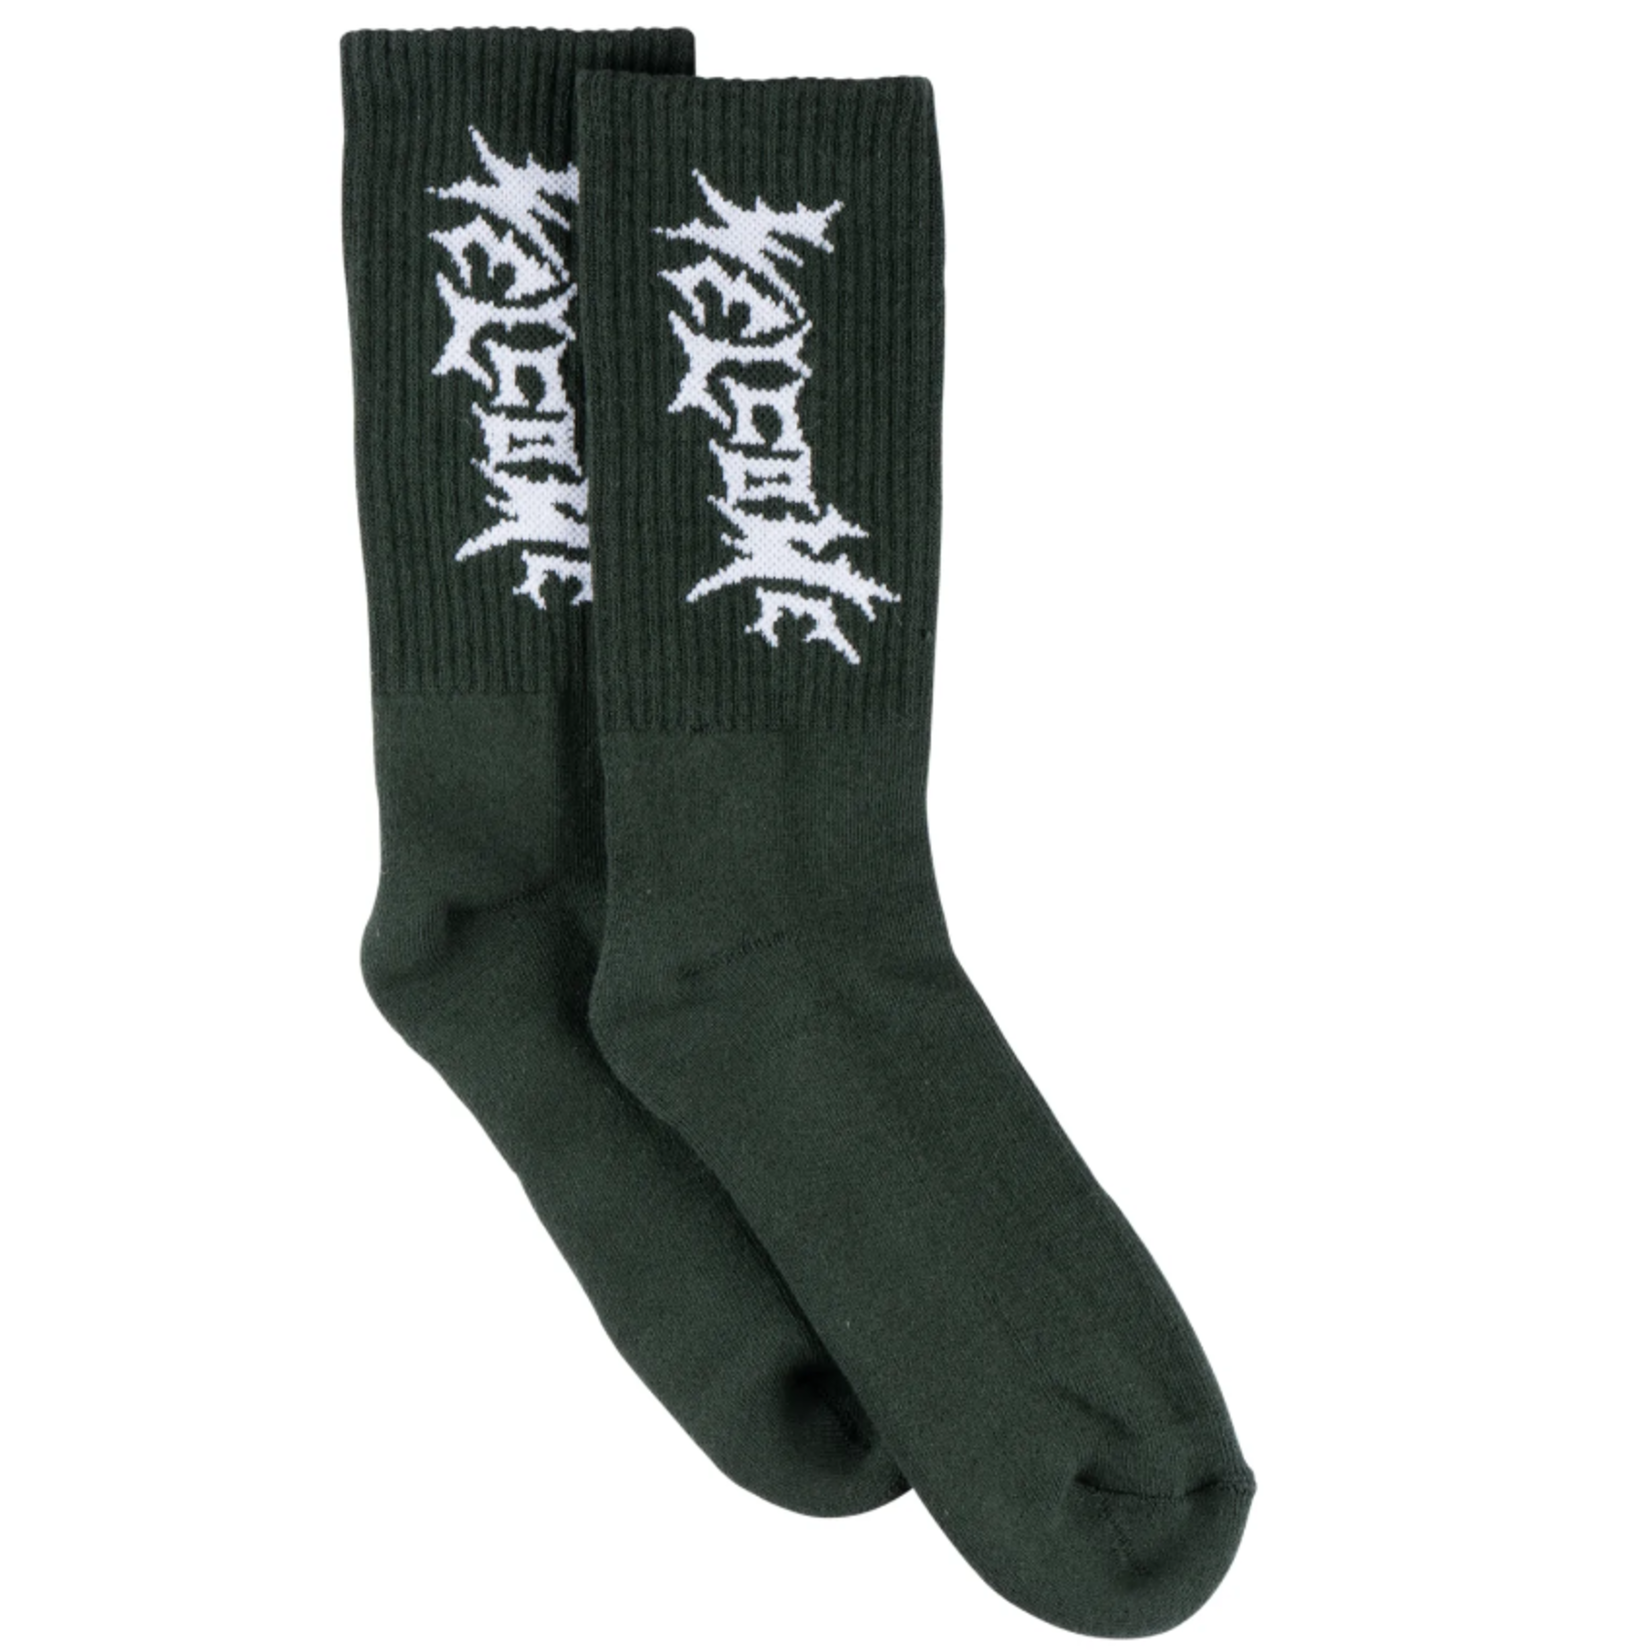 Welcome Welcome Vampire Crew Socks - Forest